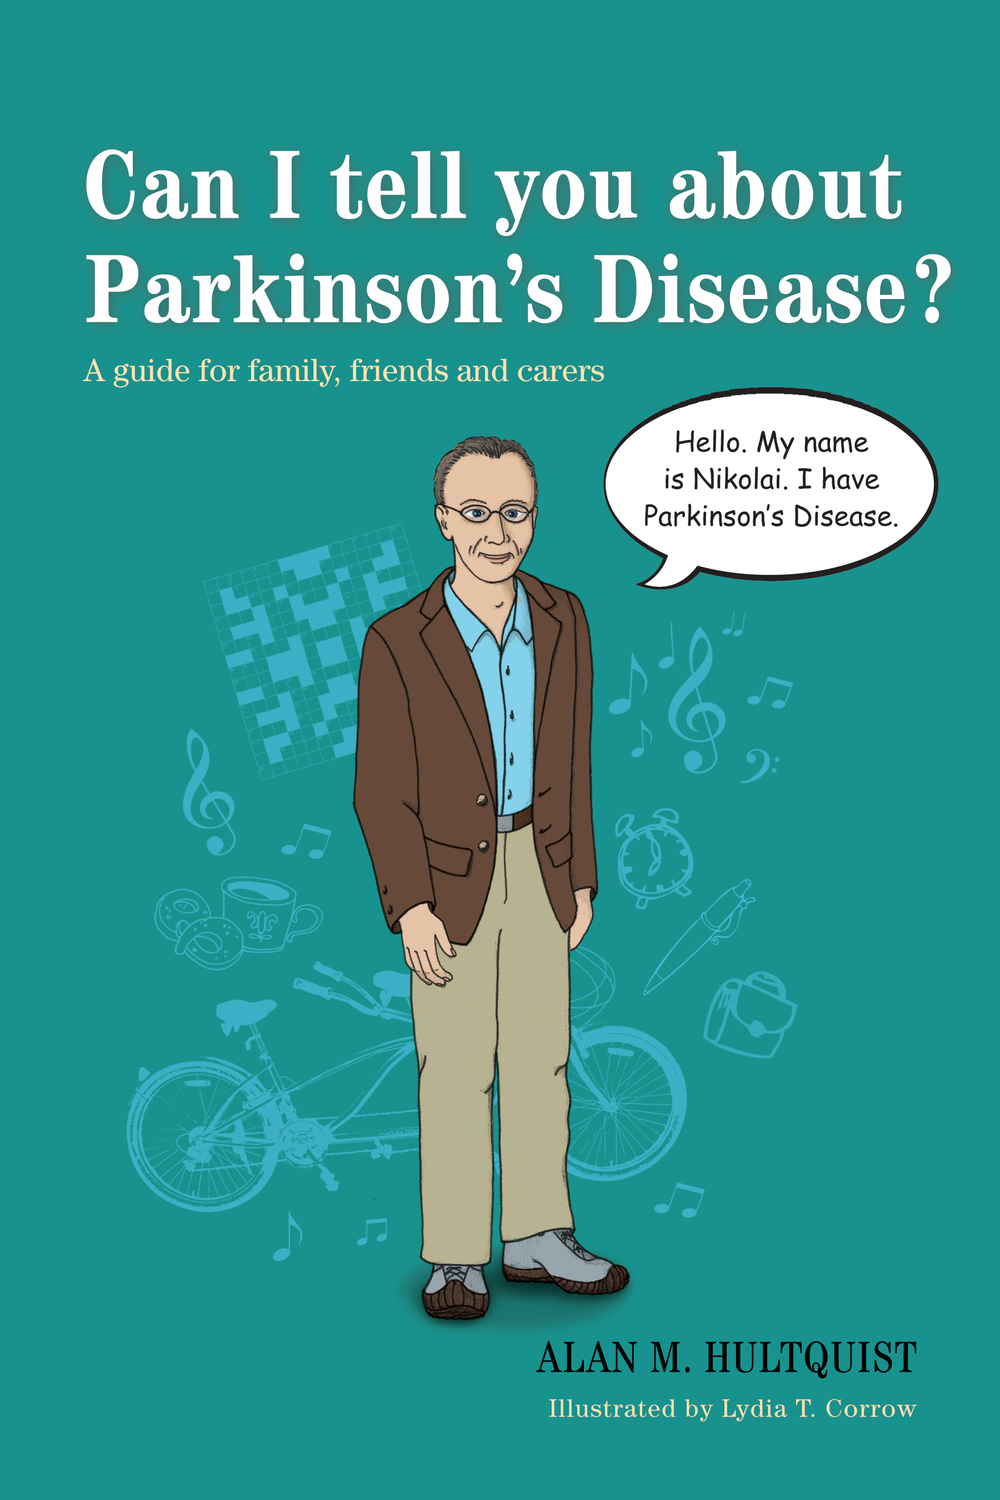 Can I tell you about Parkinson's Disease? - Lydia Corrow, Alan M. Hultquist